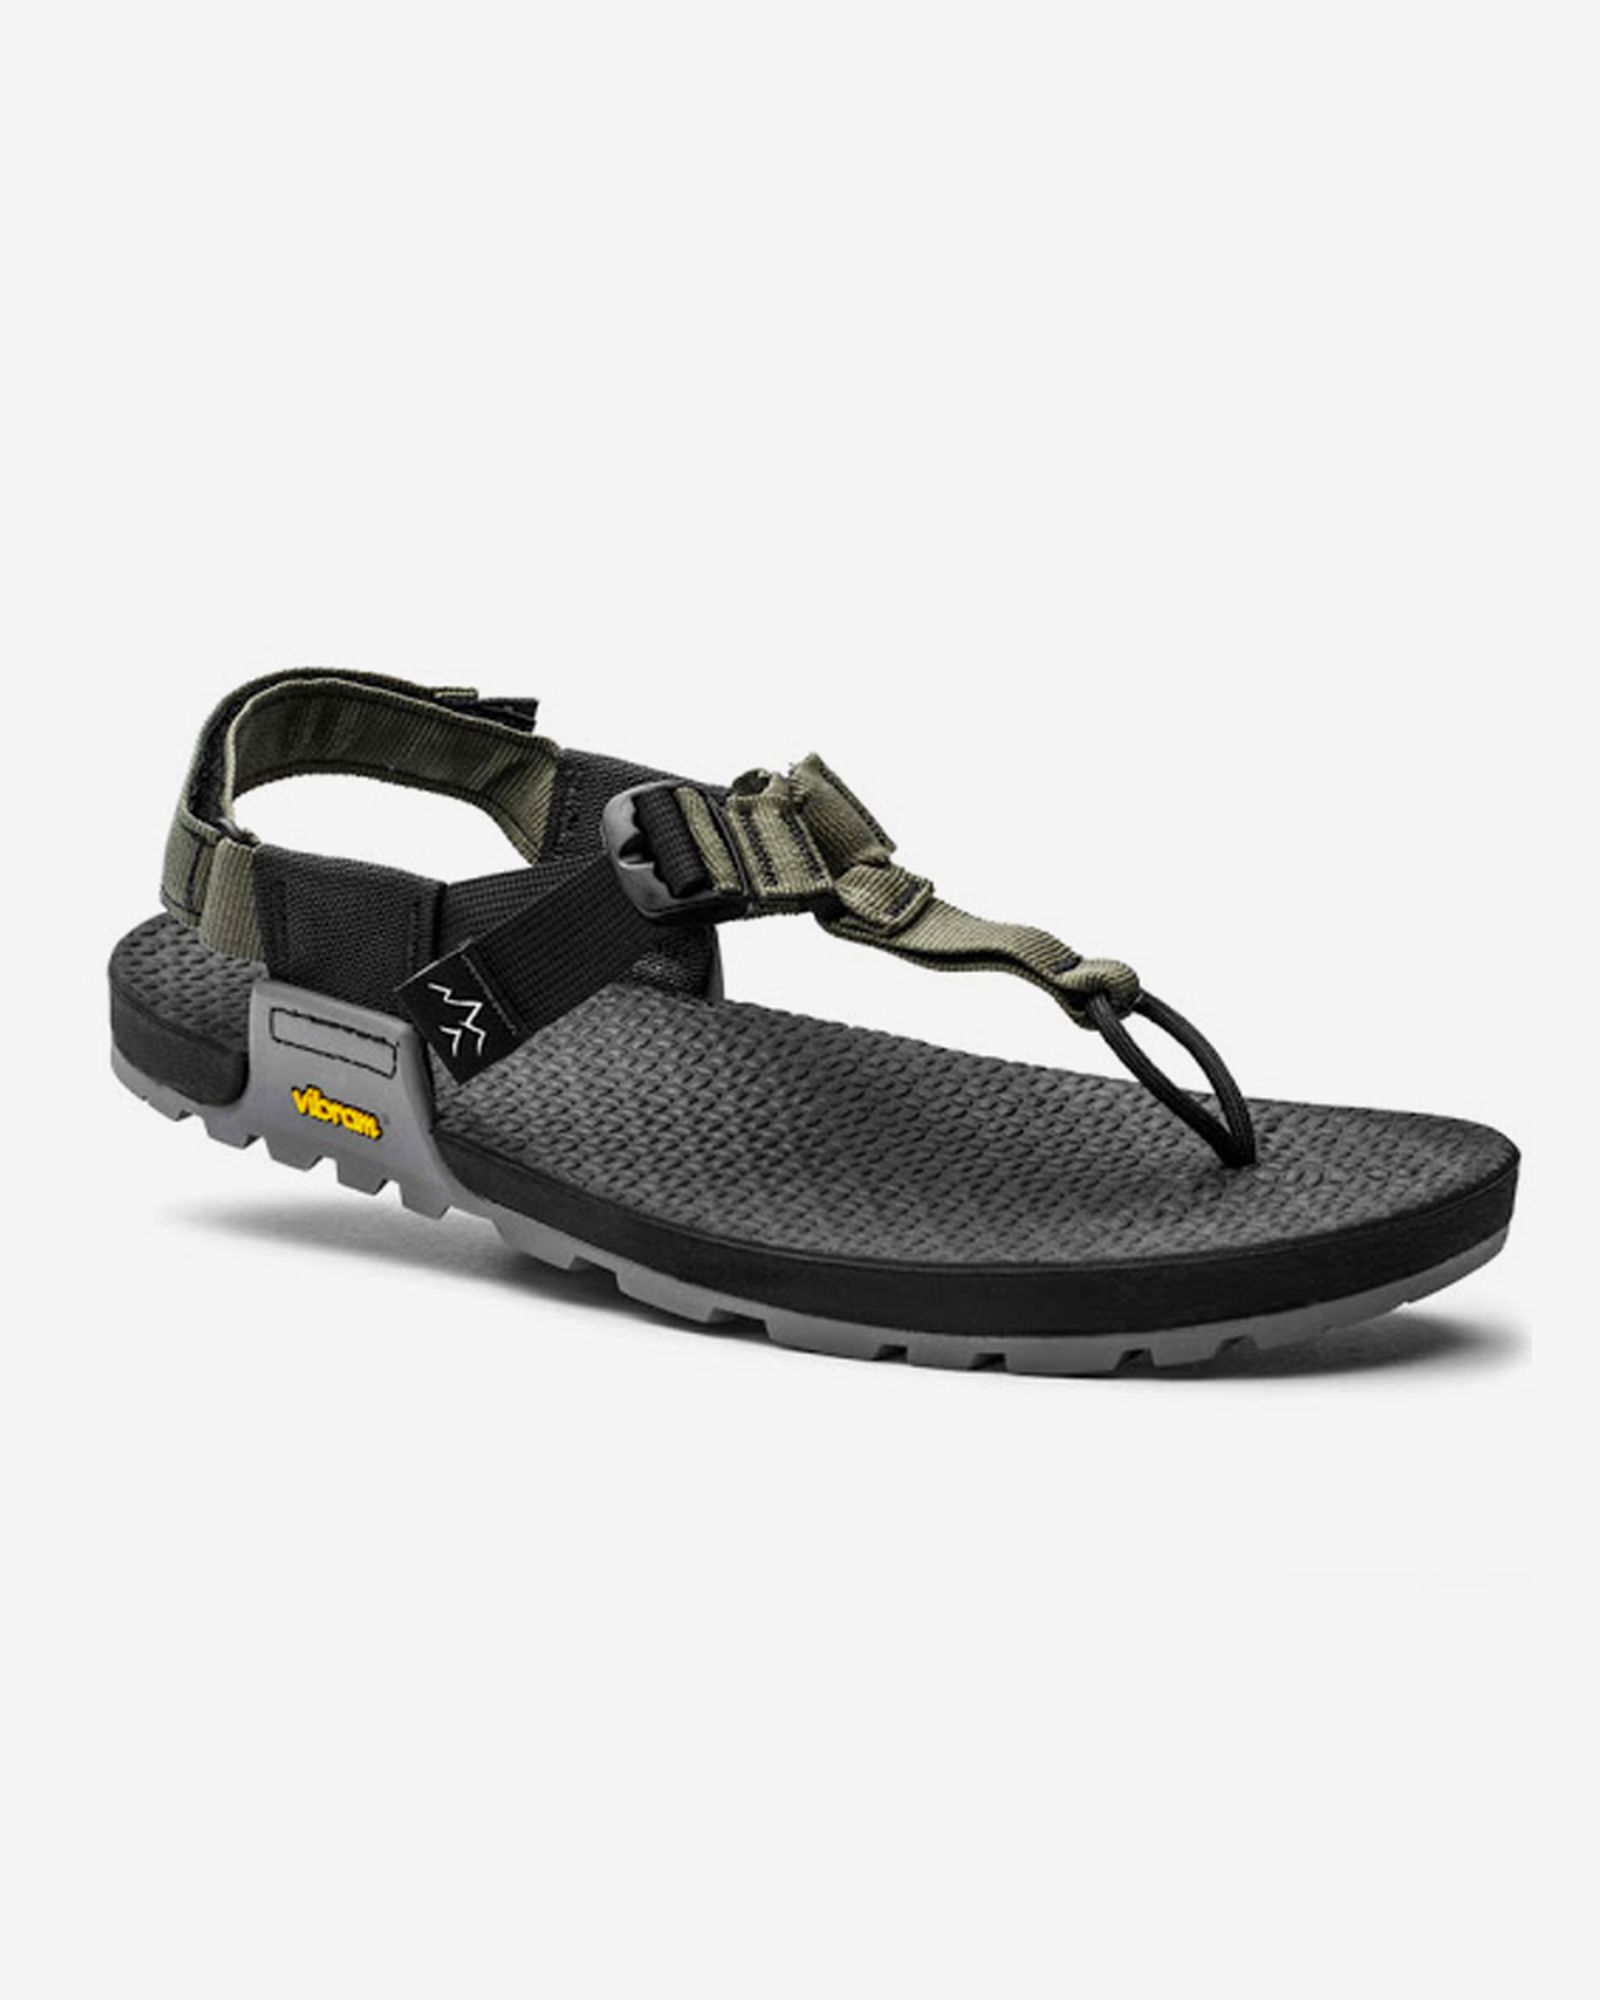 dad-sandals-roundtable-shopping-guide-03